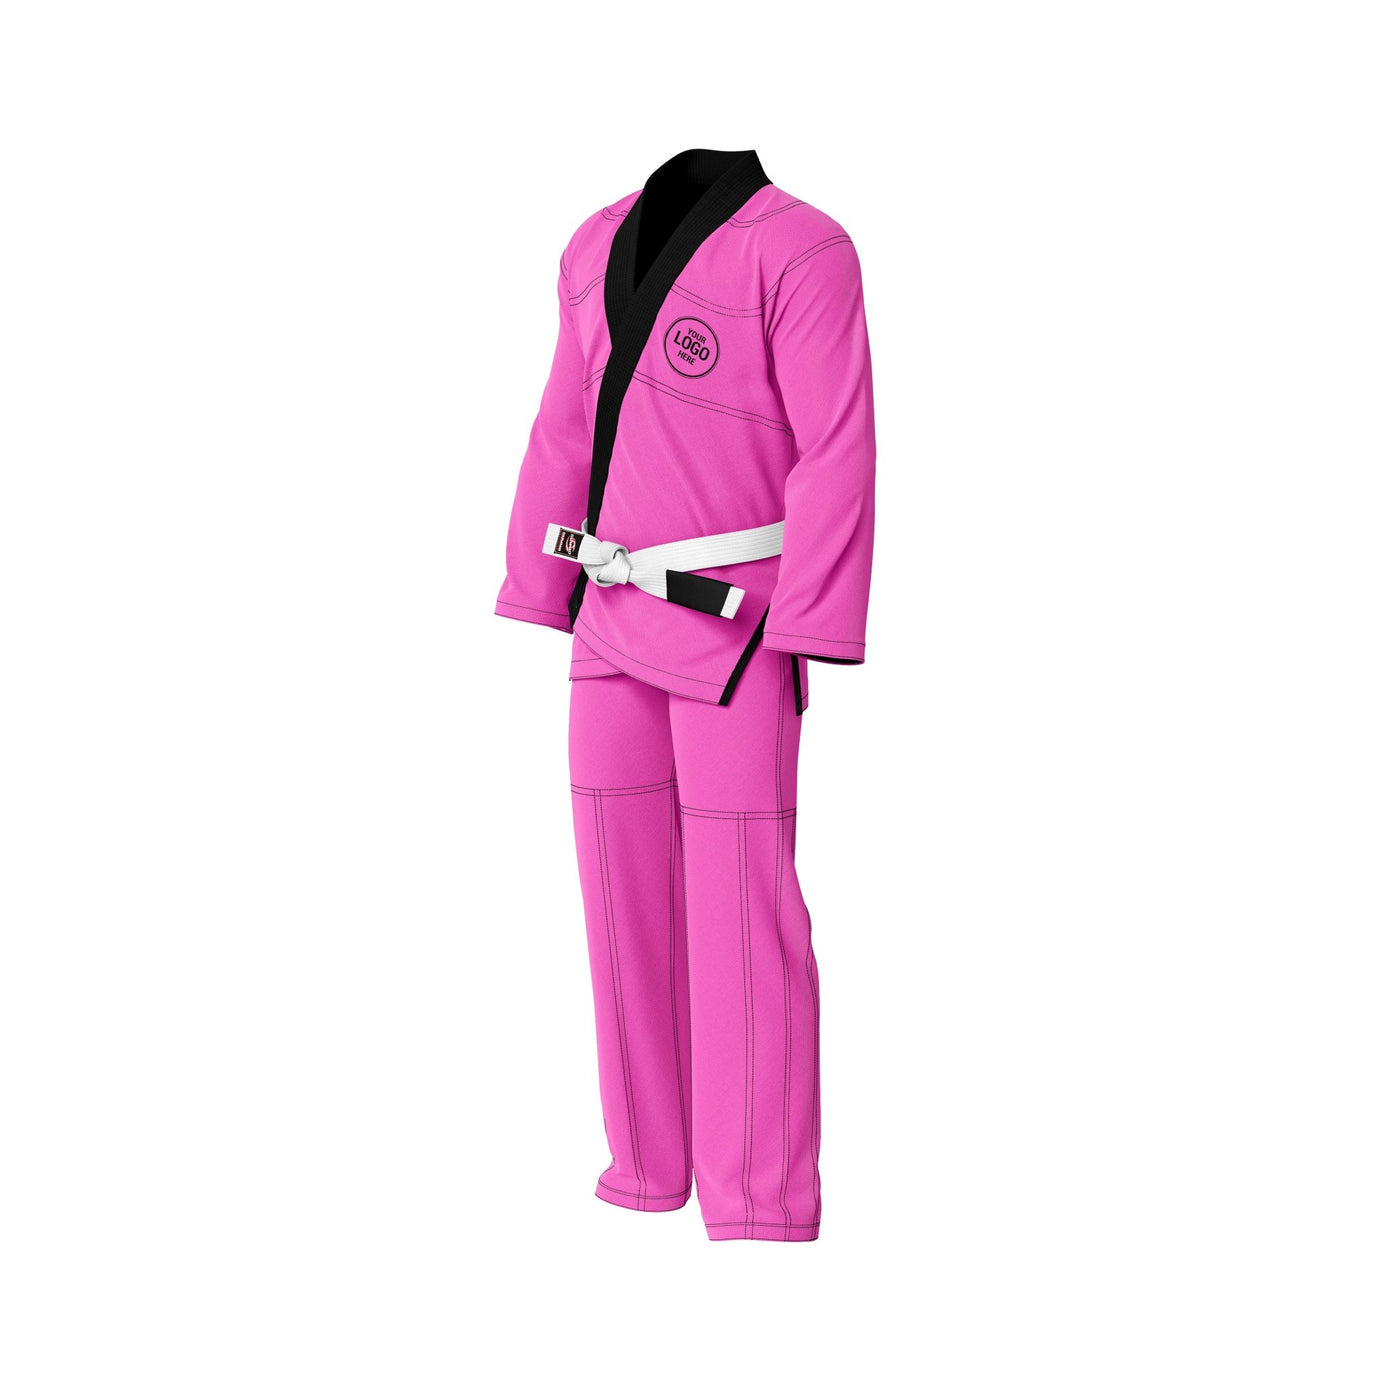 Exclusive Pink Rash Guard lining With Your Logo/Name BJJ GI - Summo Sports